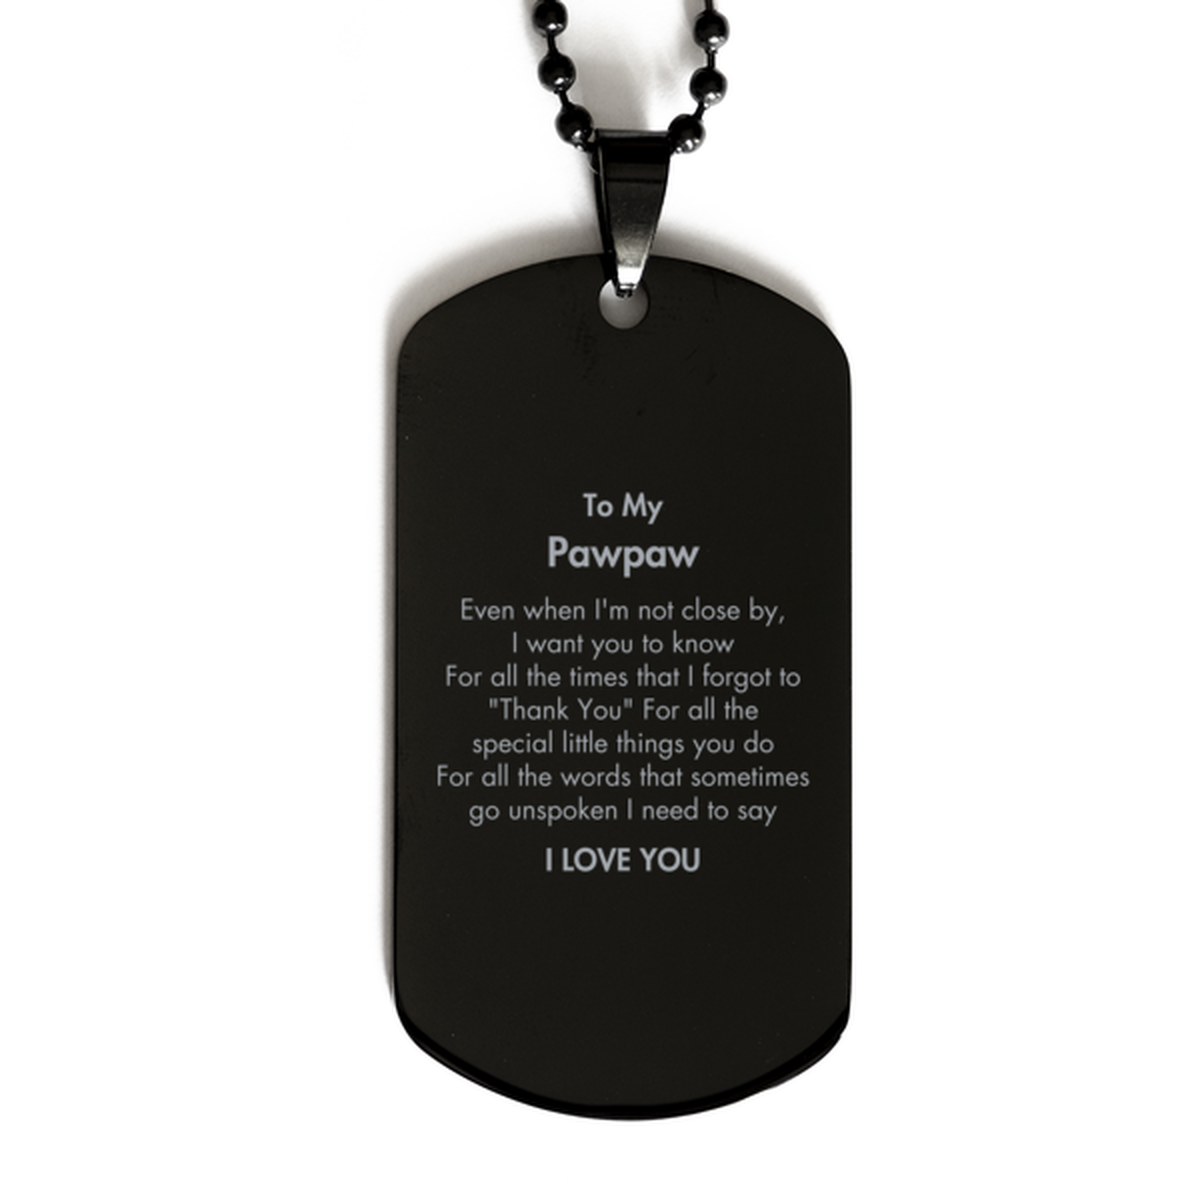 Thank You Gifts for Pawpaw, Keepsake Black Dog Tag Gifts for Pawpaw Birthday Mother's day Father's Day Pawpaw For all the words That sometimes go unspoken I need to say I LOVE YOU